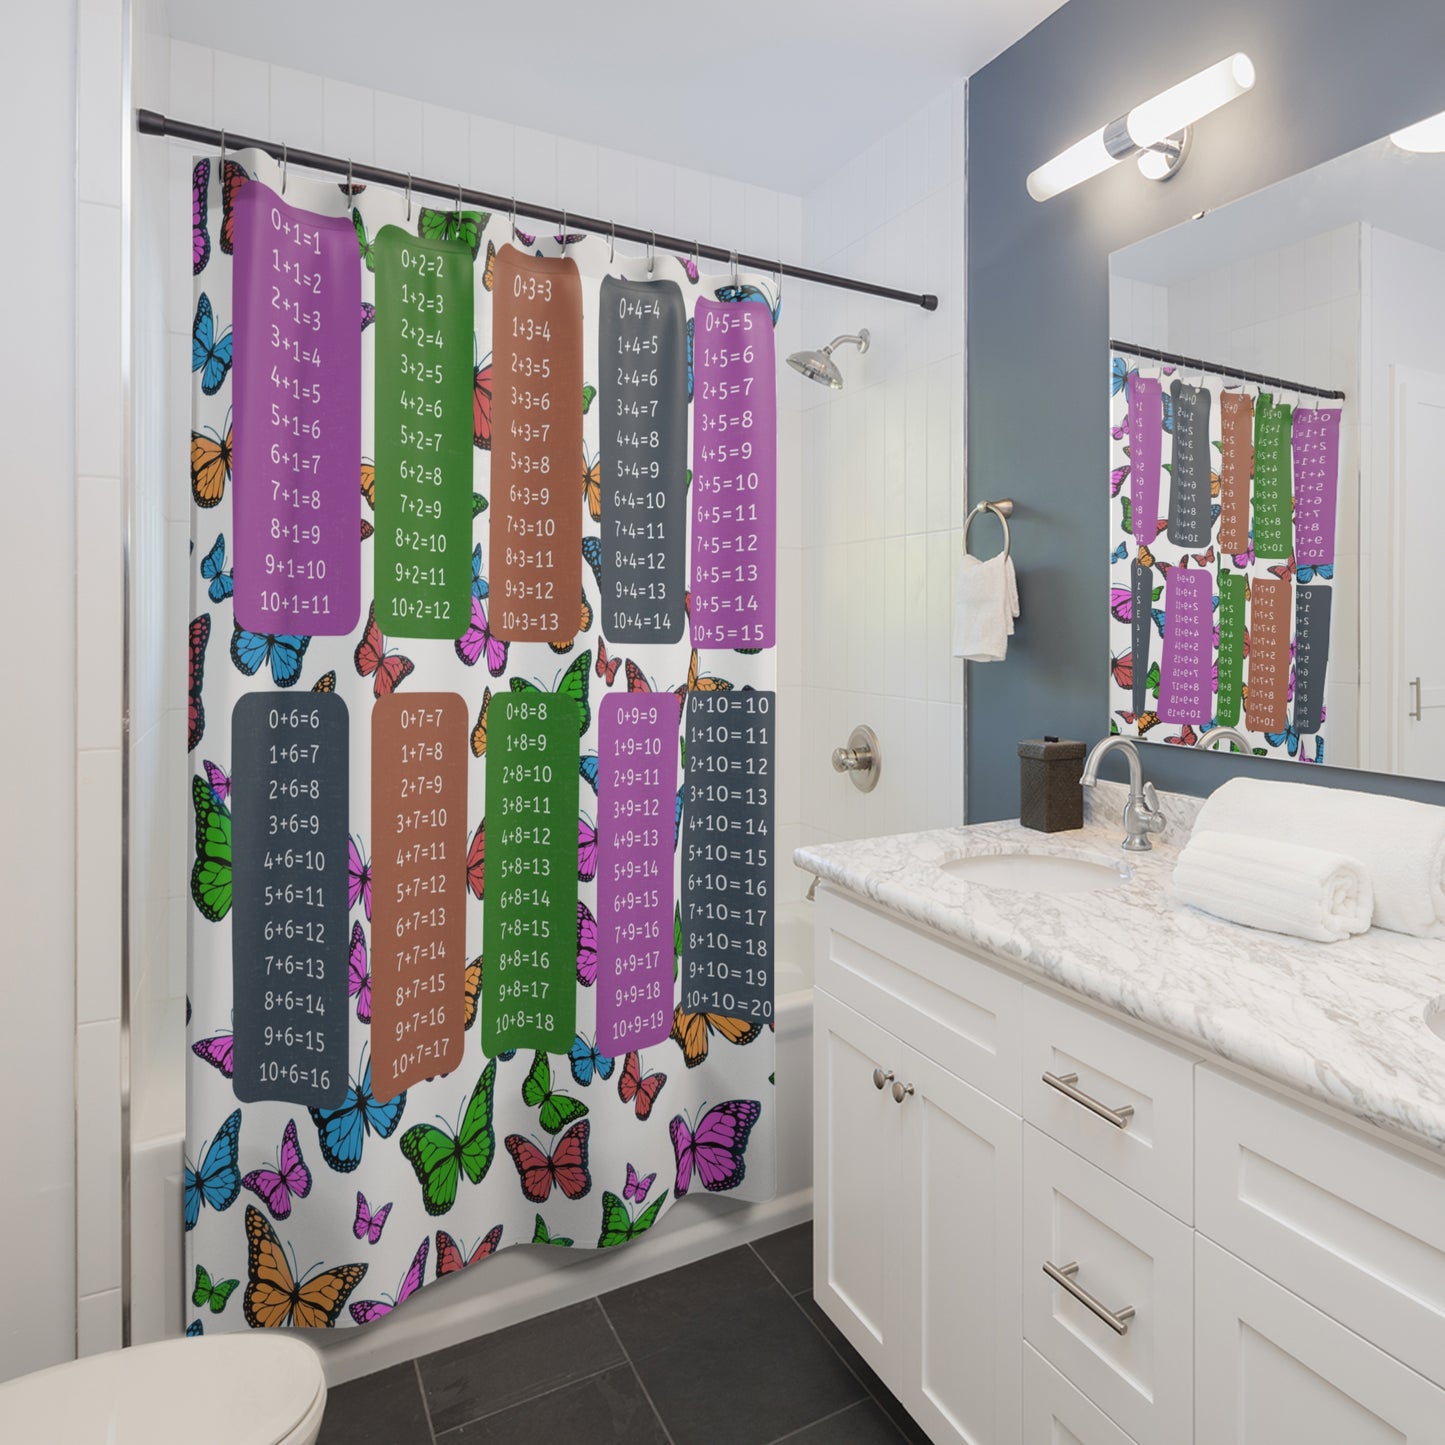 Butterfly and Addition Shower Curtain